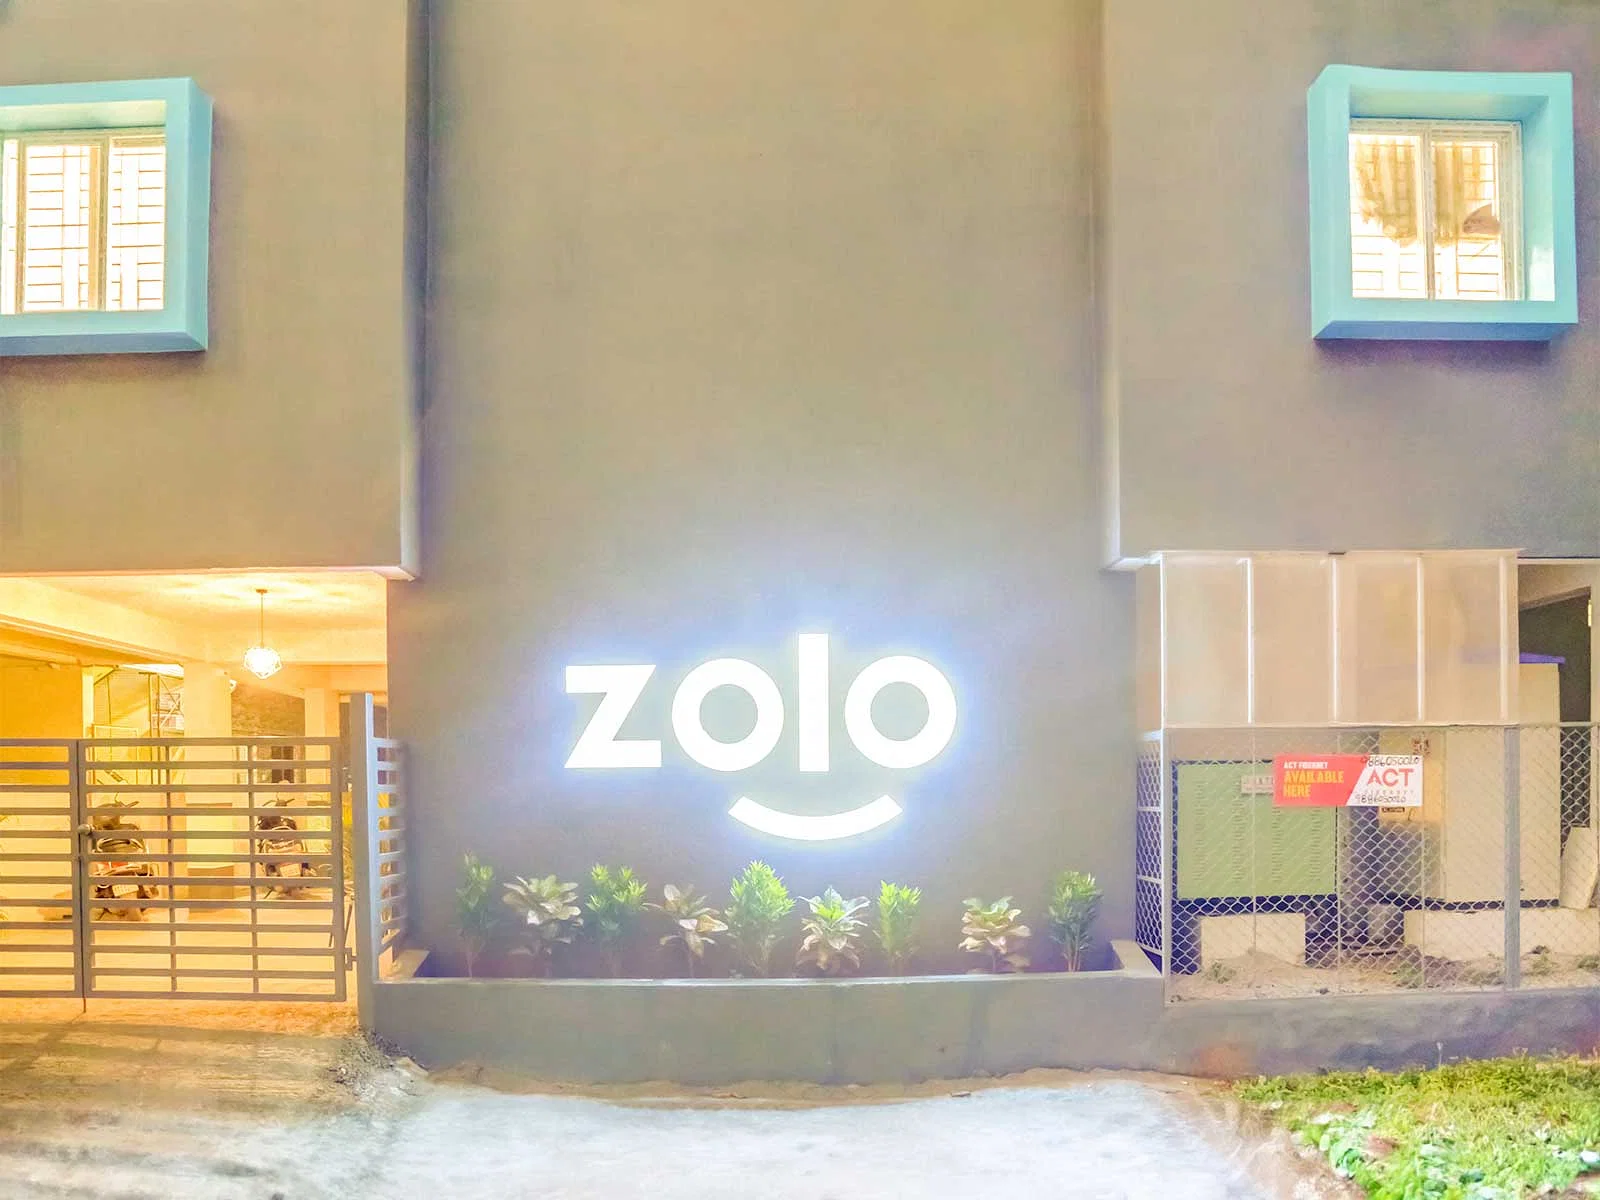 budget-friendly PGs and hostels for unisex with single rooms with daily hopusekeeping-Zolo Unico